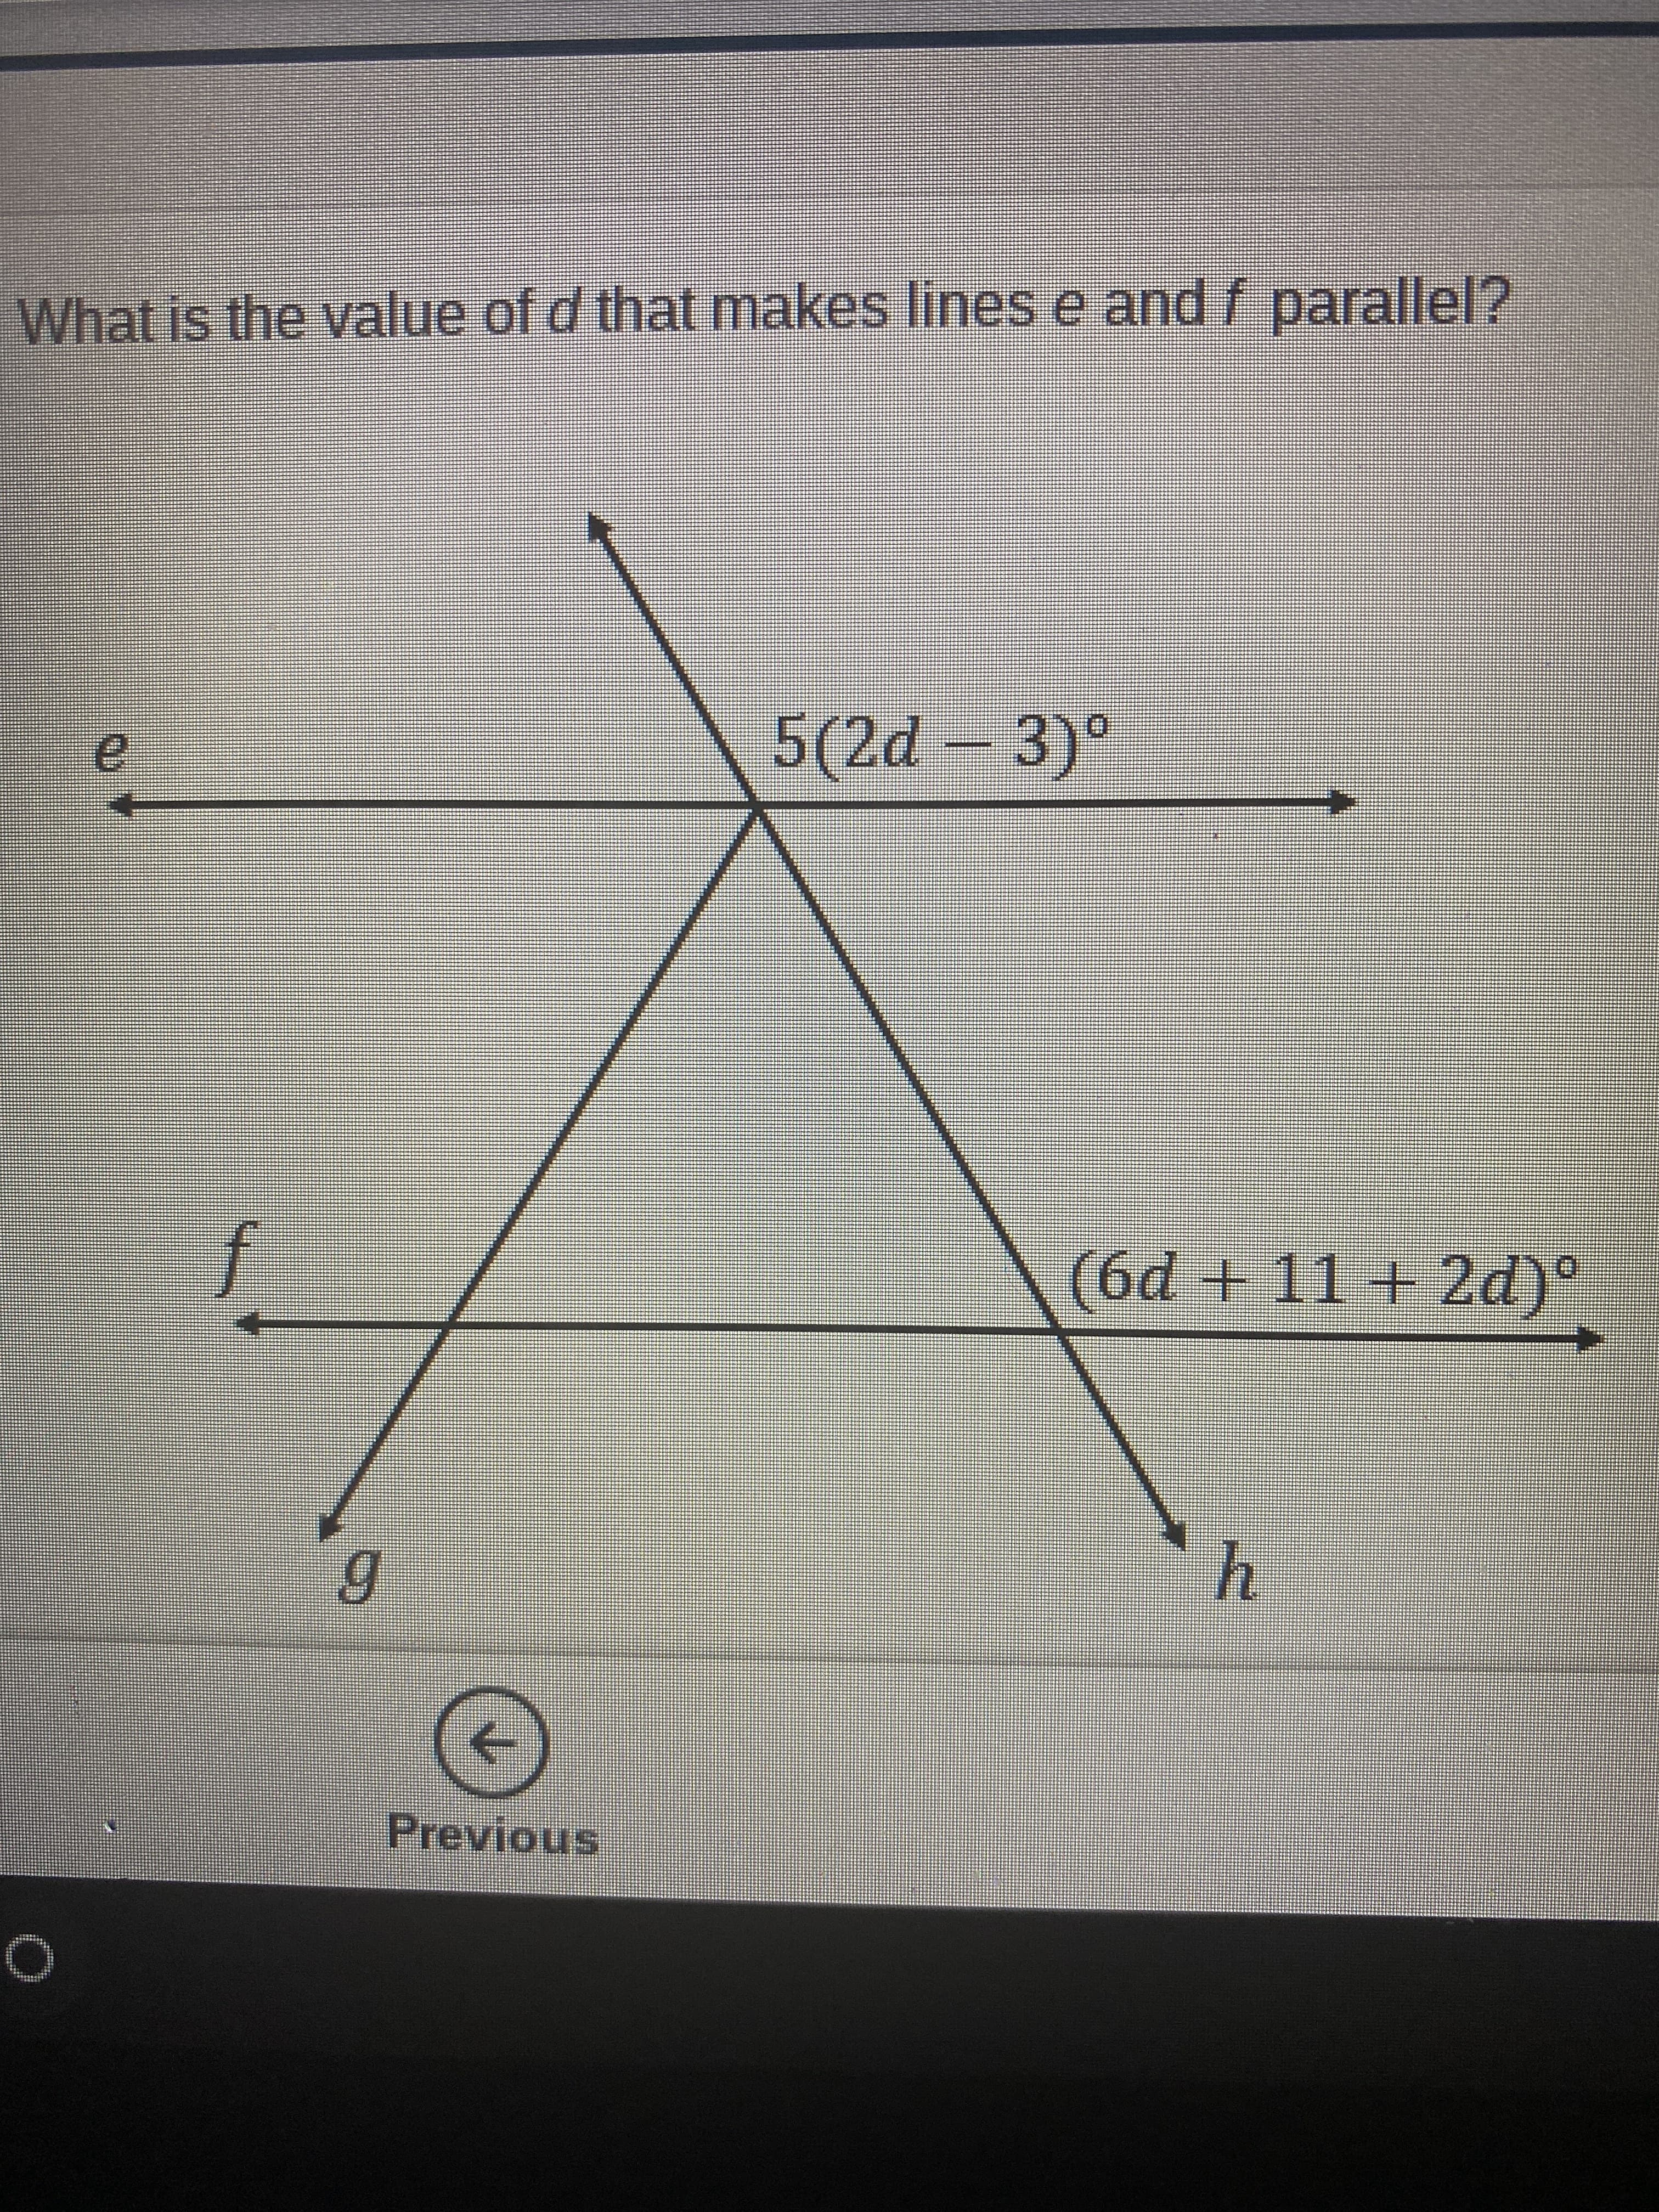 What is the value of d that makes lines e and f parallel?
